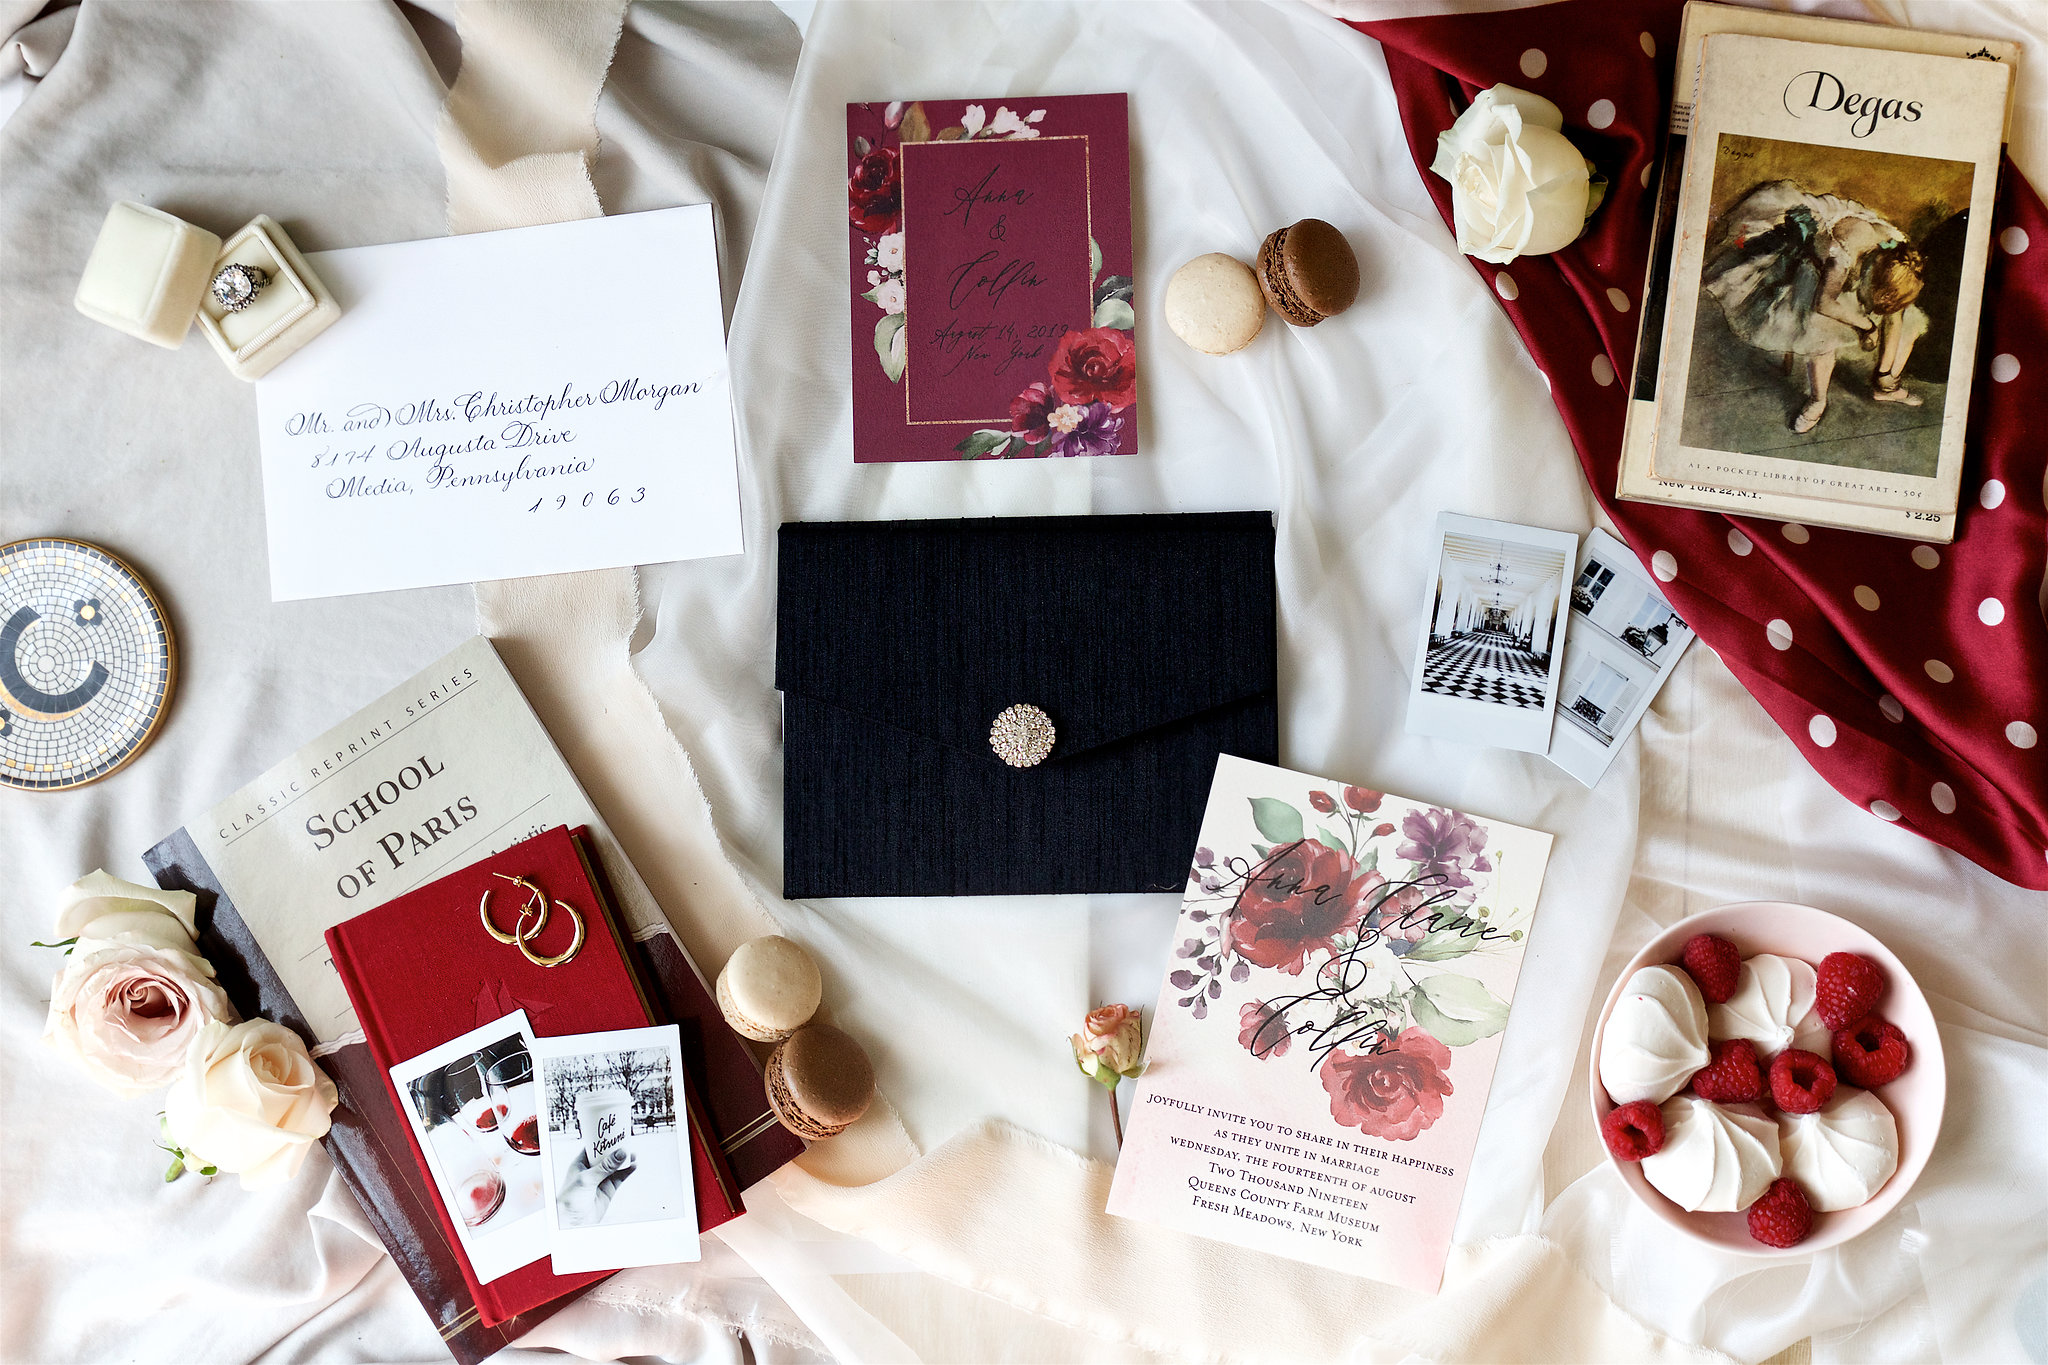 Rose maroon burgundy invitation suite with florals. Moody luxurious invitation suite with modern meets vintage French Parisian styling.